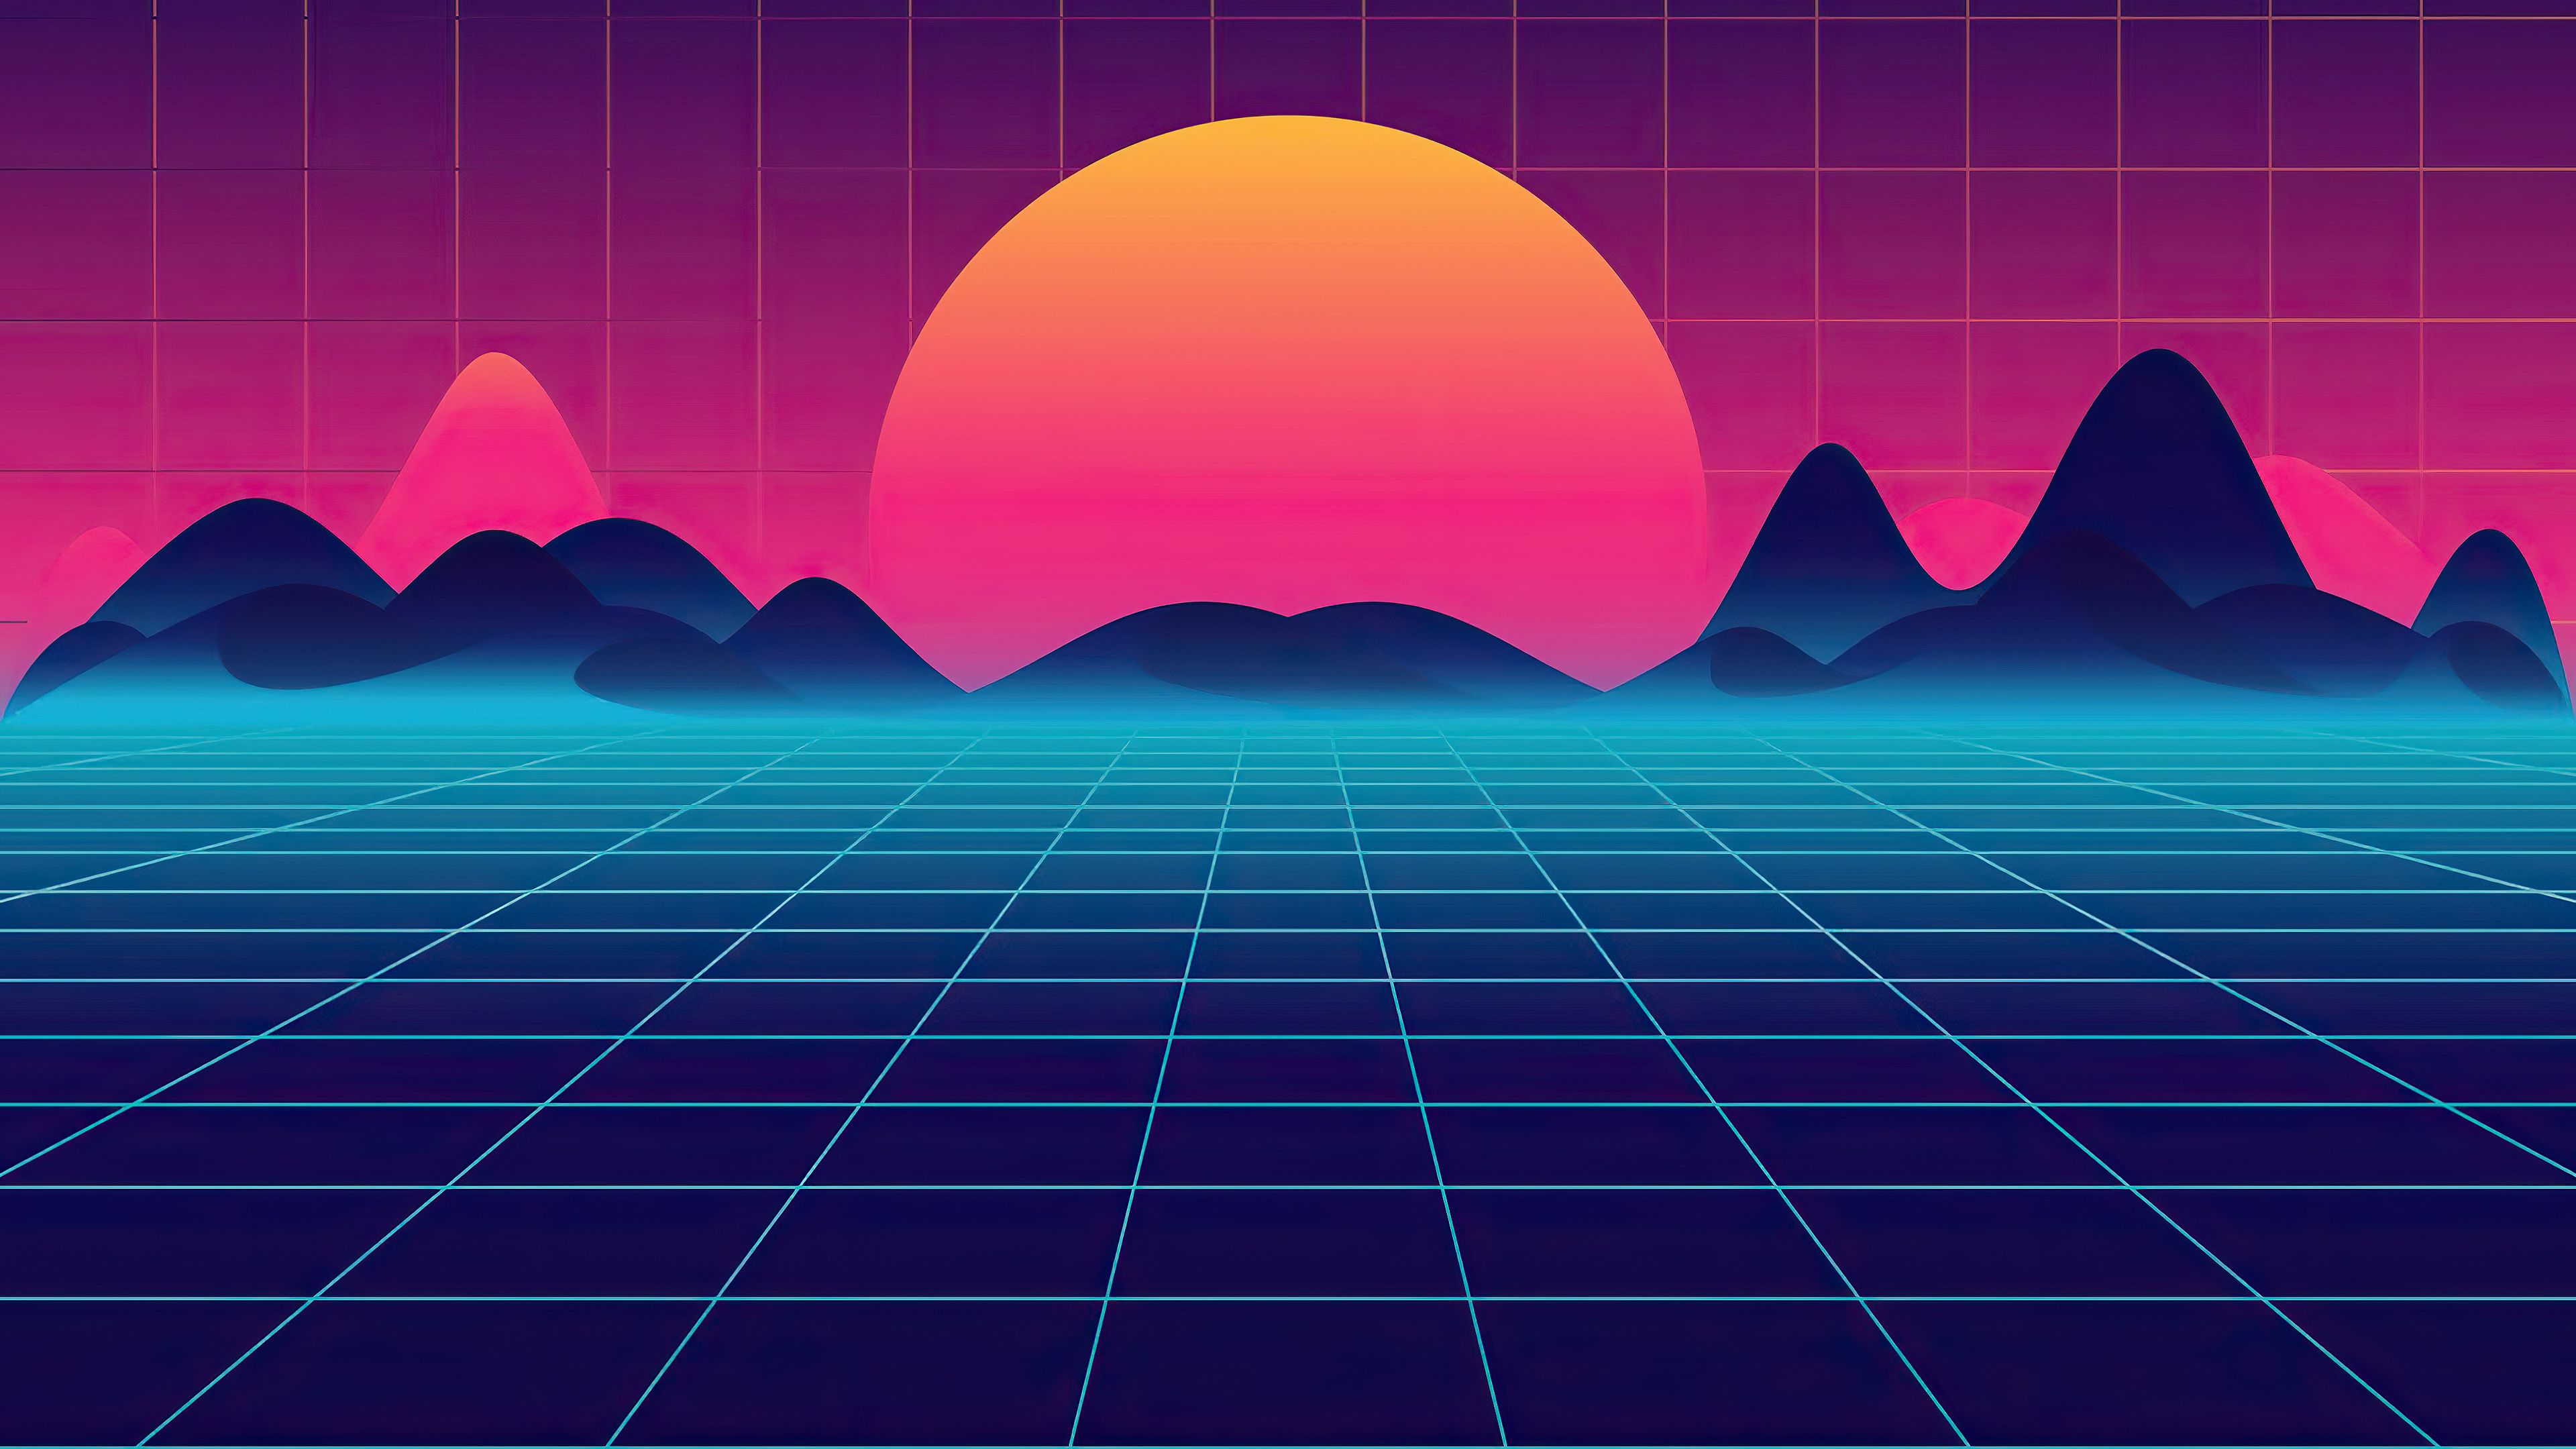 Retro Synthwave Sunrise 4k, HD Artist, 4k Wallpaper, Image, Background, Photo and Picture